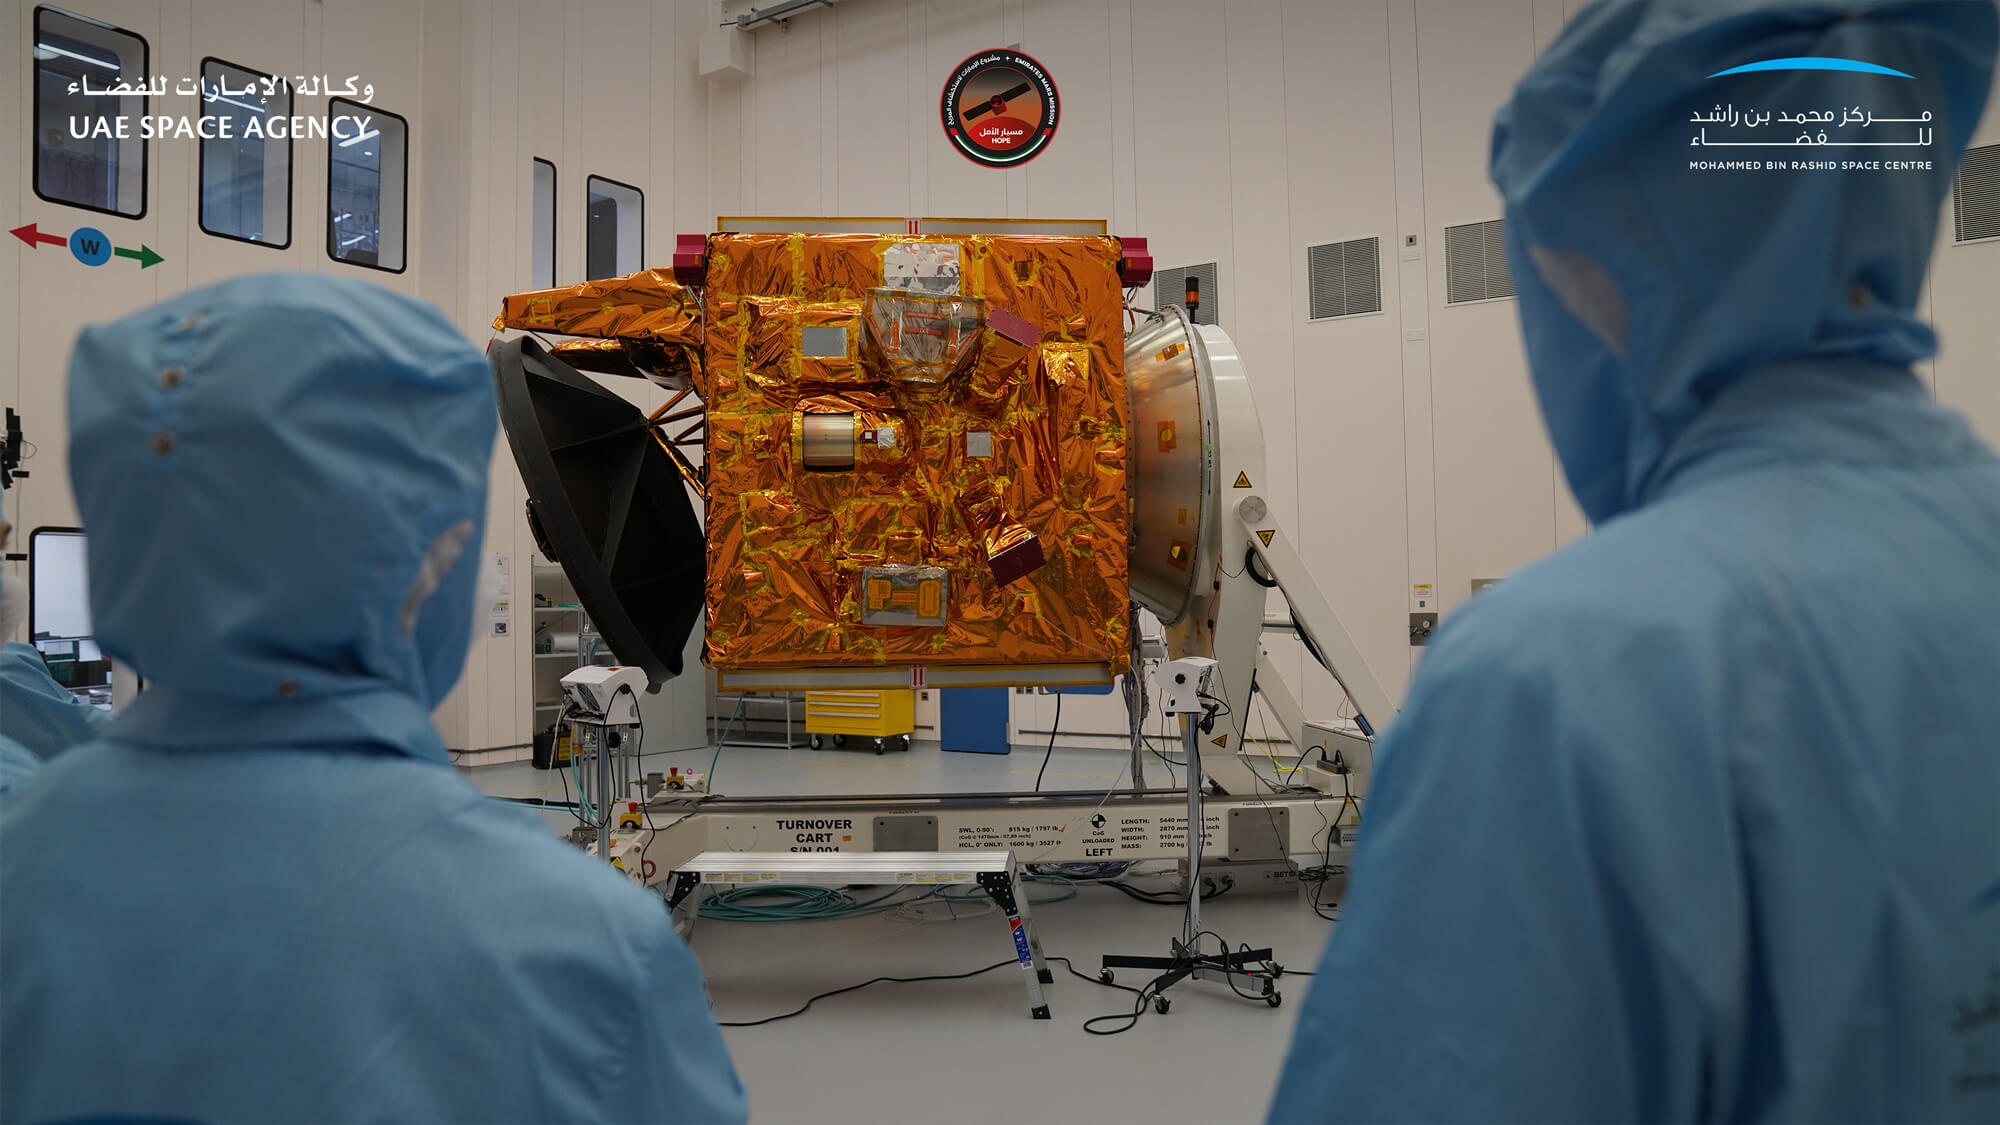 The Hope satellite during development. (Image: UAE Space Agency)